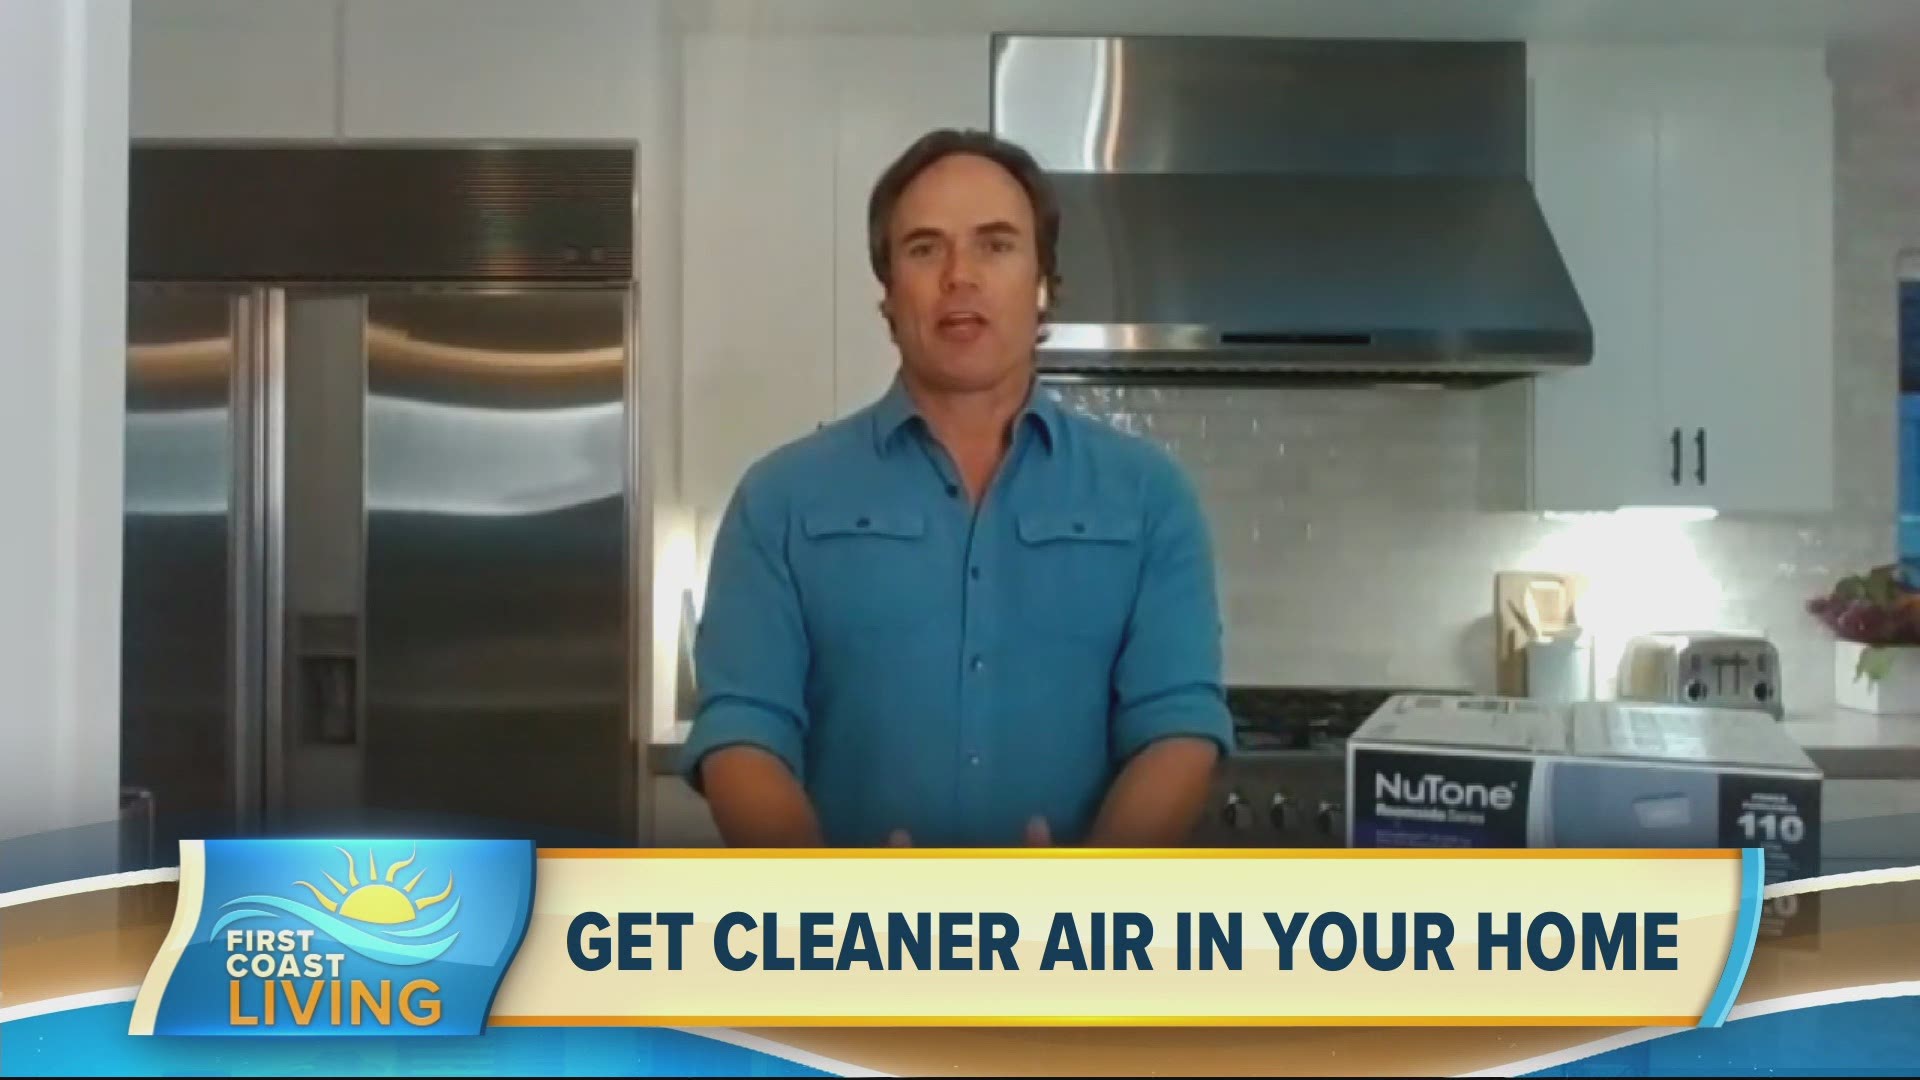 A few simple ways to get cleaner air in your house!